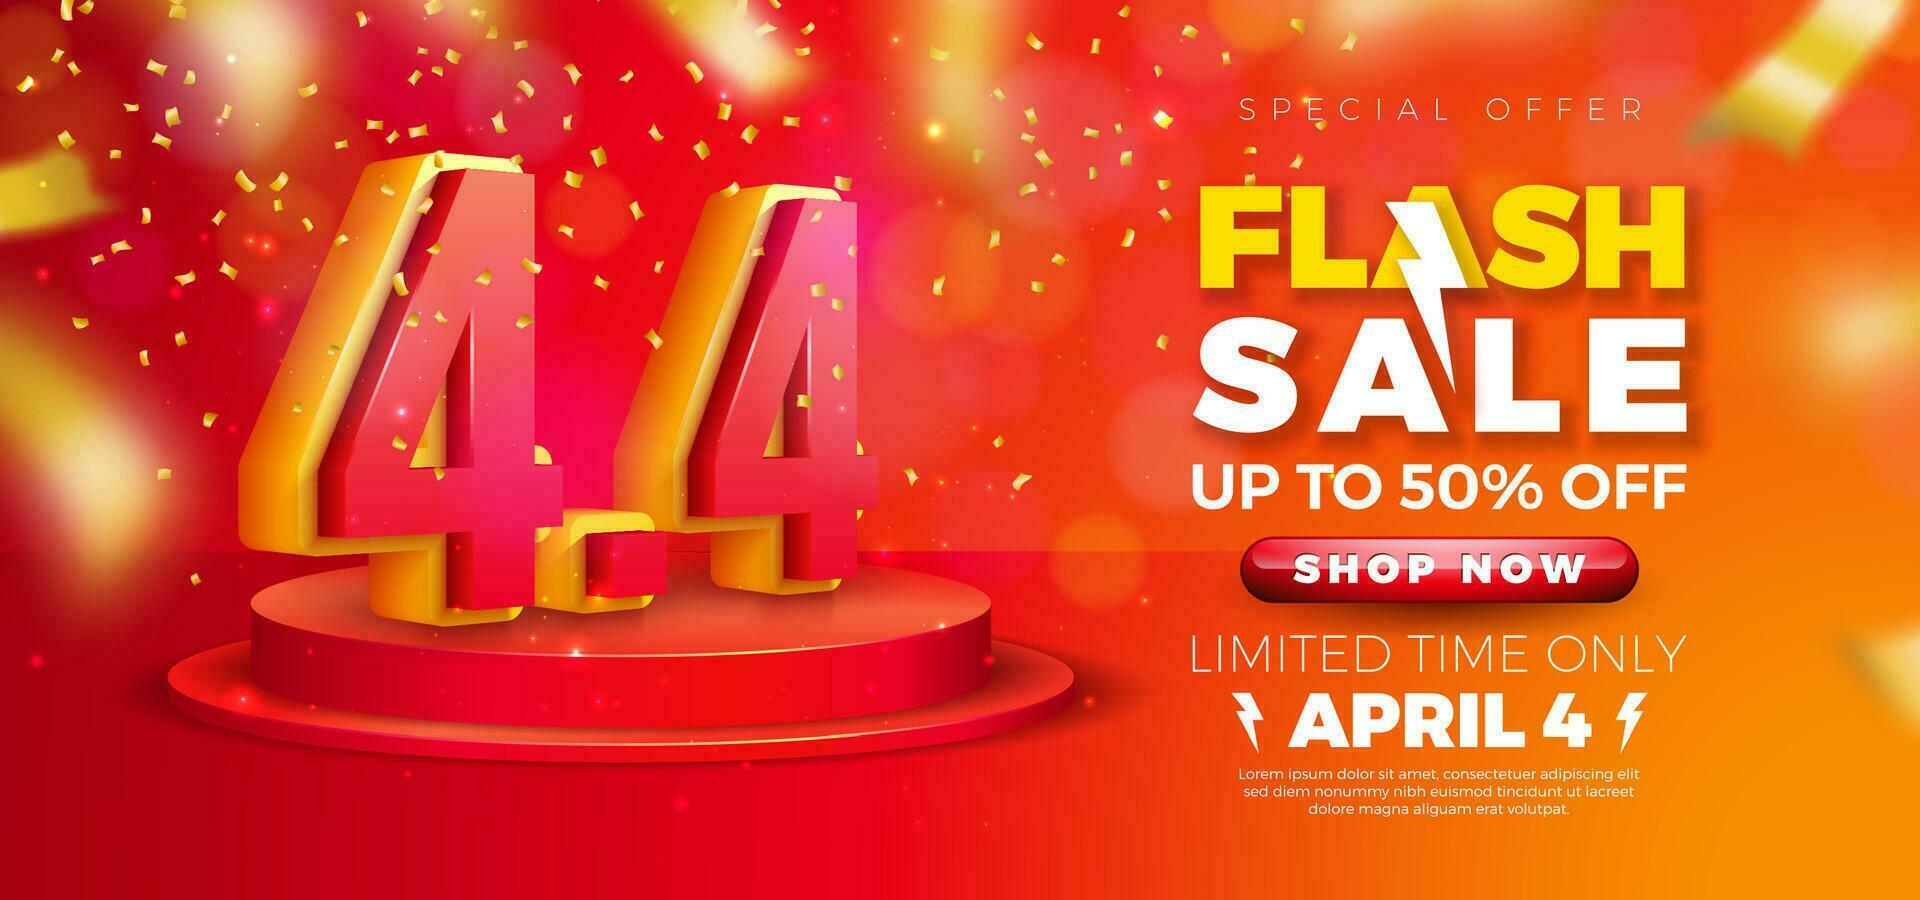 Promotional Business Sale Theme Design with 3d 4.4 Number on Podium and Falling Confetti on Red Background. Vector April 4 Special Offer Illustration for Coupon, Voucher, Banner, Flyer,